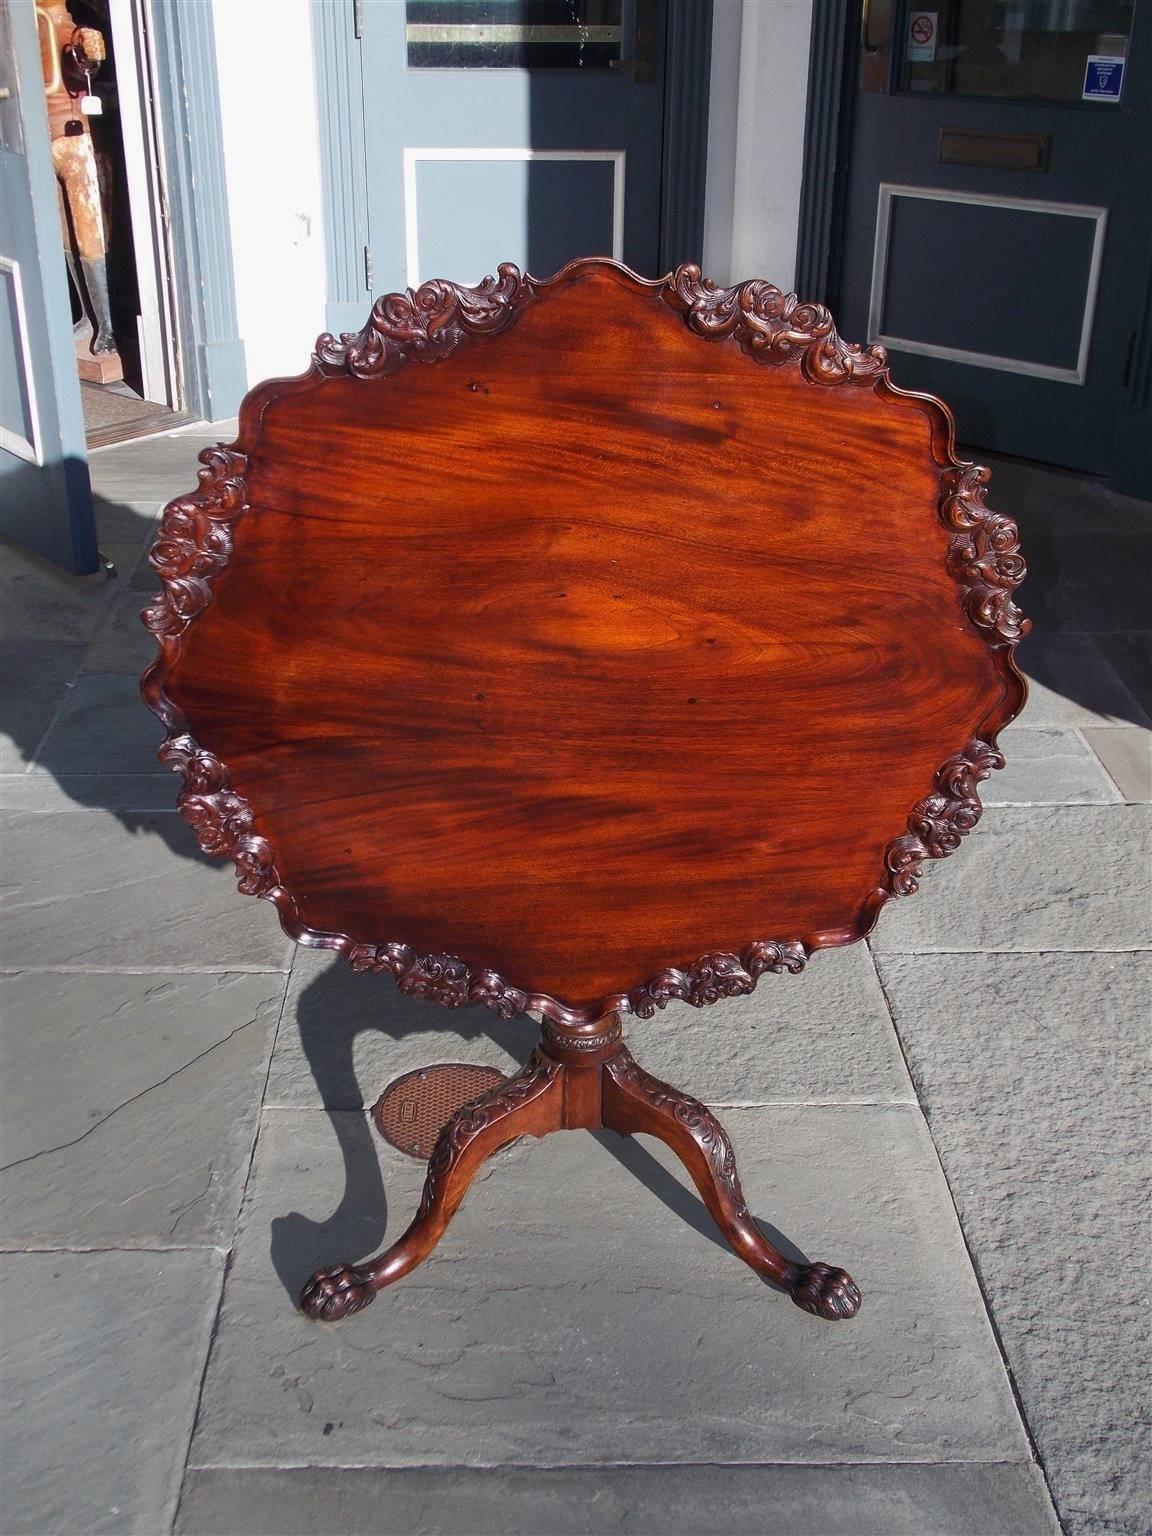 American Chippendale mahogany one board tilt-top tea table with a carved floral scalloped edge, turned bulbous spiral ringed pedestal, and terminating on a tripod base with floral acanthus carved knees resting on hairy paw feet. Table retains the